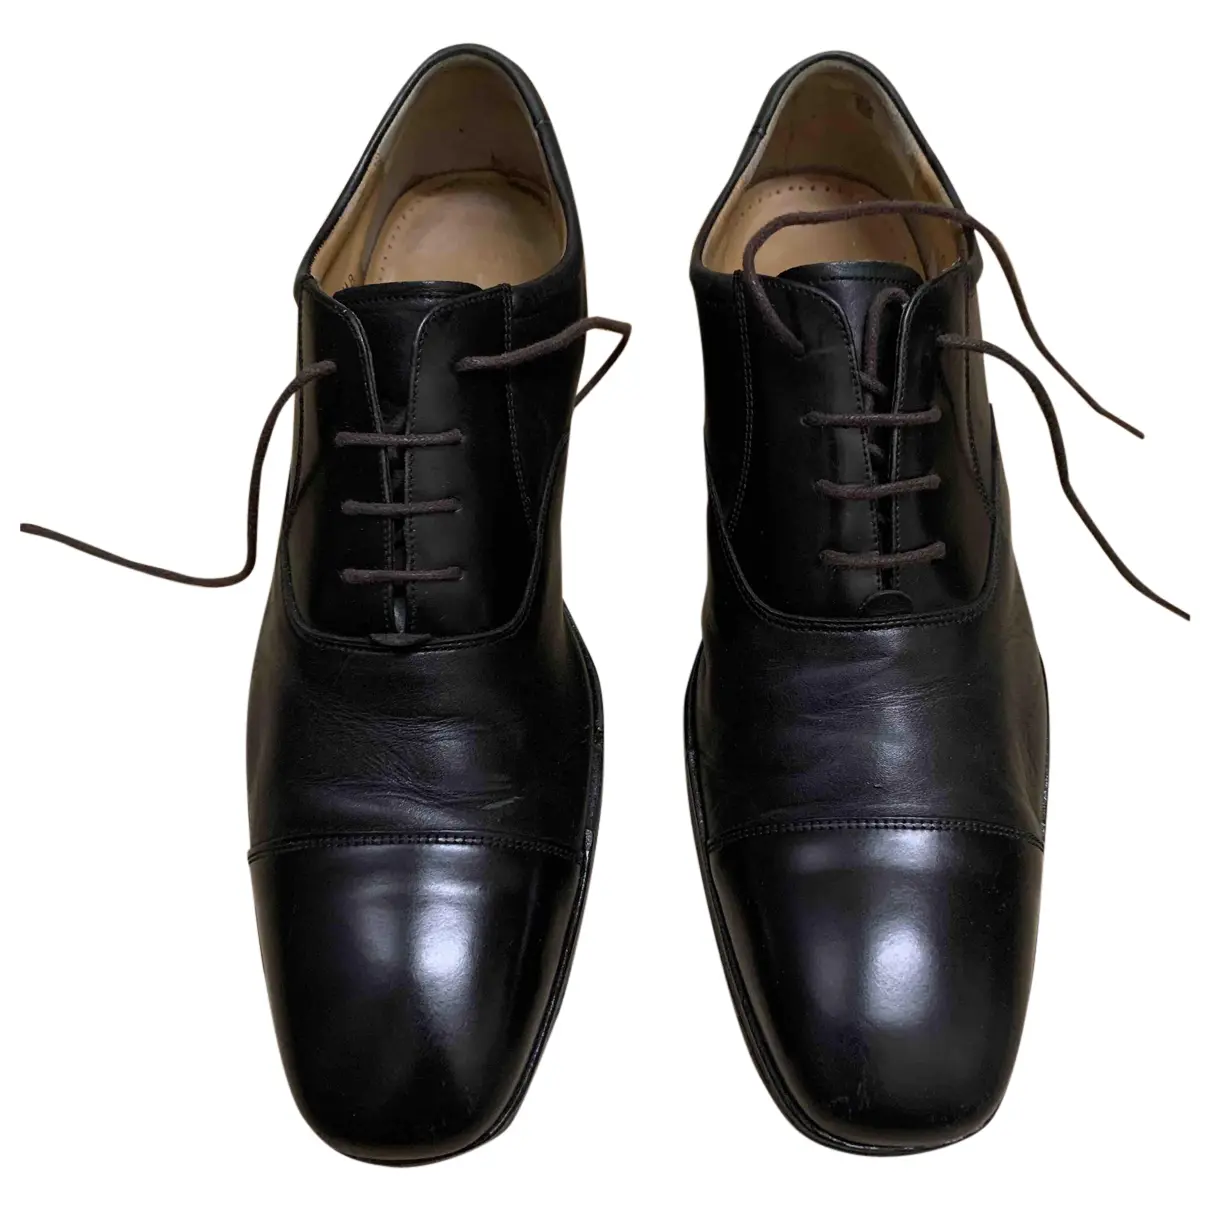 Leather lace ups Barker